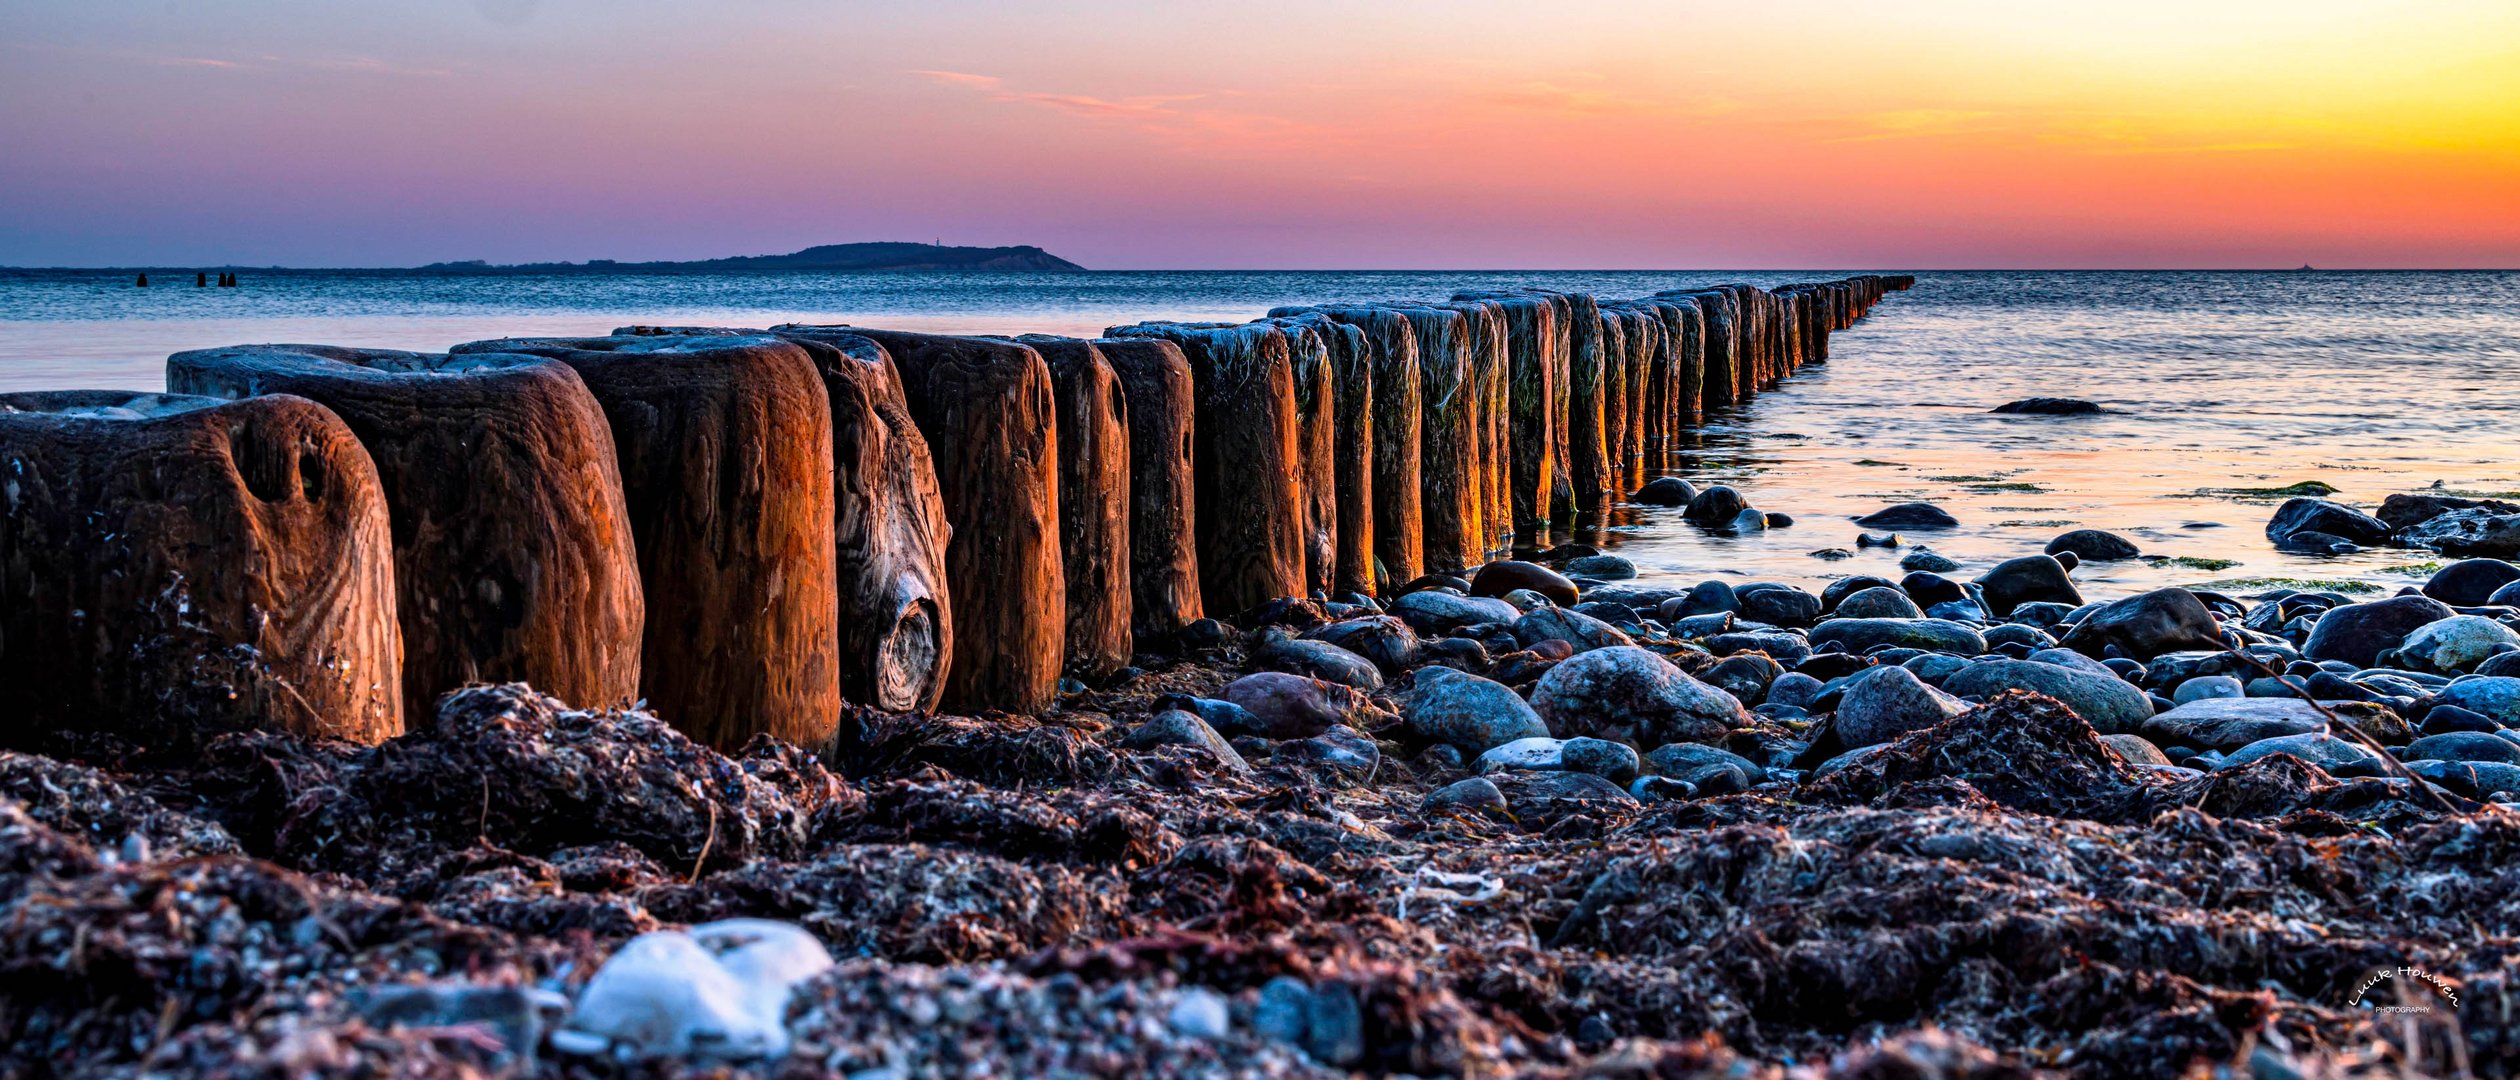 Buhnen in der Ostsee bei Sonnenuntergang / Wooden breakwaters in the Baltic at sunset